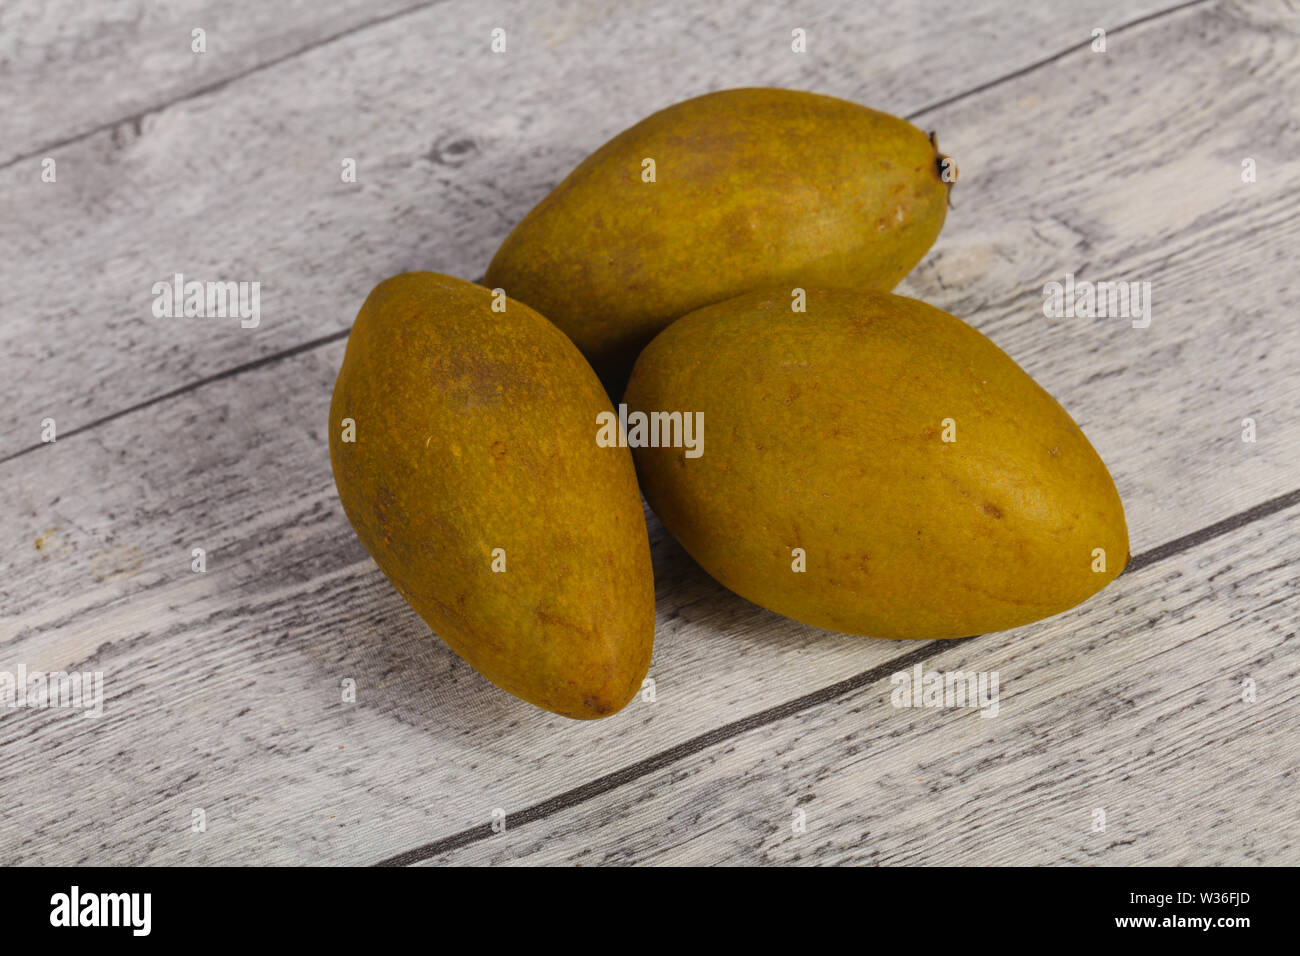 Exotic tropical tasty fruit - Sapodilla in the plate Stock Photo